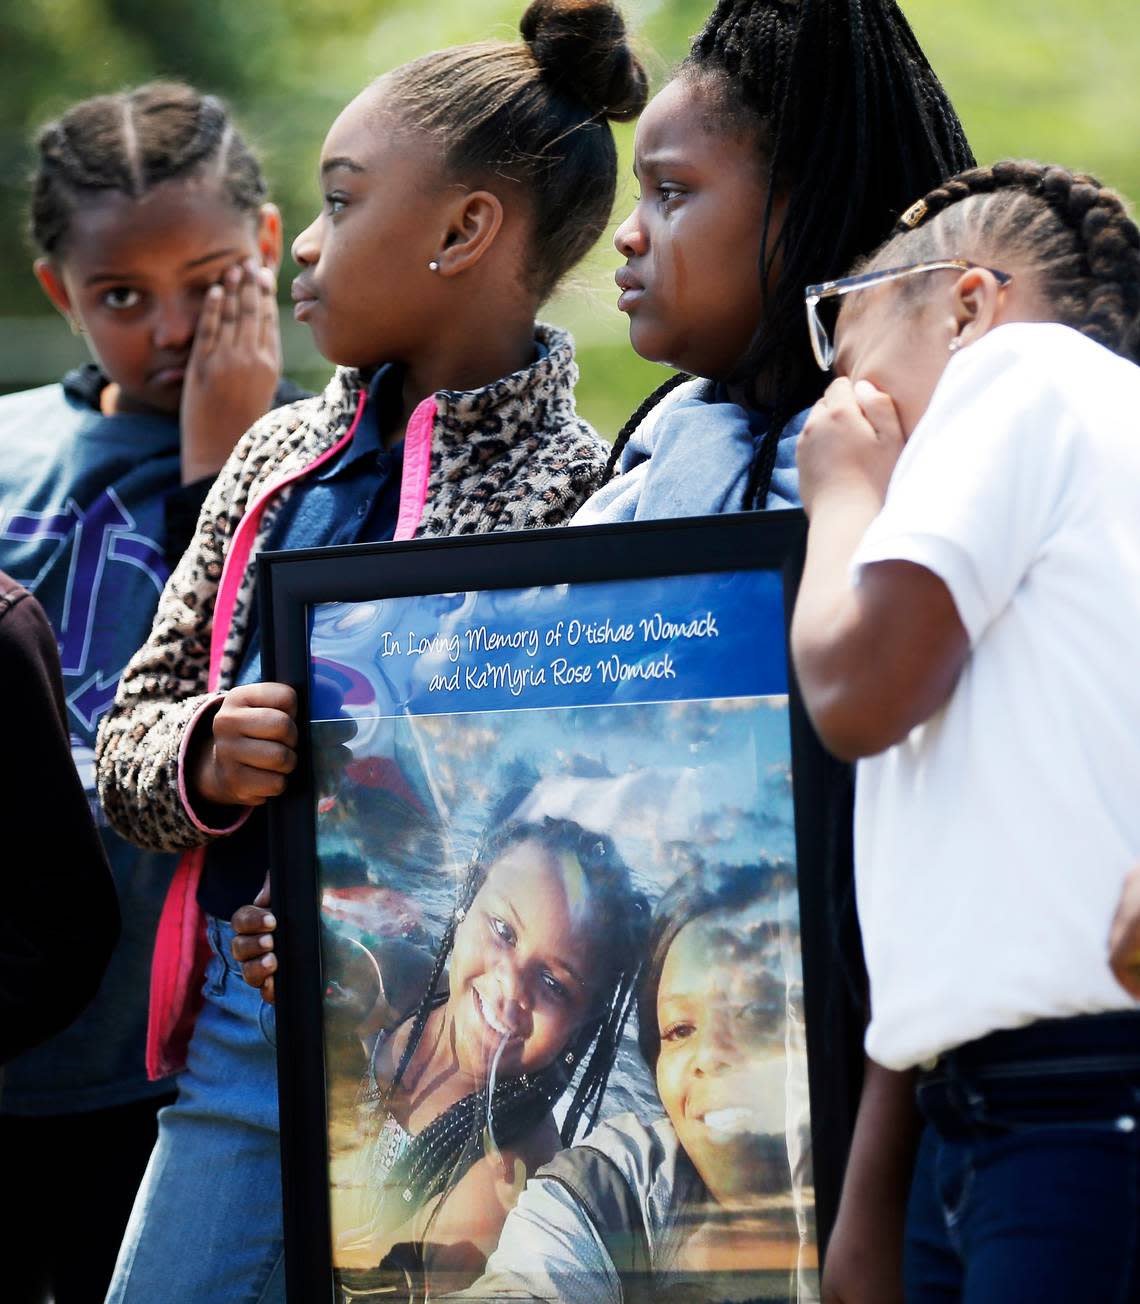 (Starting second from left) Fourth-graders Marlya Dents, 10, Jade Fox, 9, and Ramya Sayles, 9, mourn their friend and classmate Ka’Myria Rose Womack and her mother, O’Tishae Womack, both apparent victims of domestic violence, during a memorial on April 20, 2018, at Morningside Elementary School in Fort Worth, where Ka’Myria was a student.